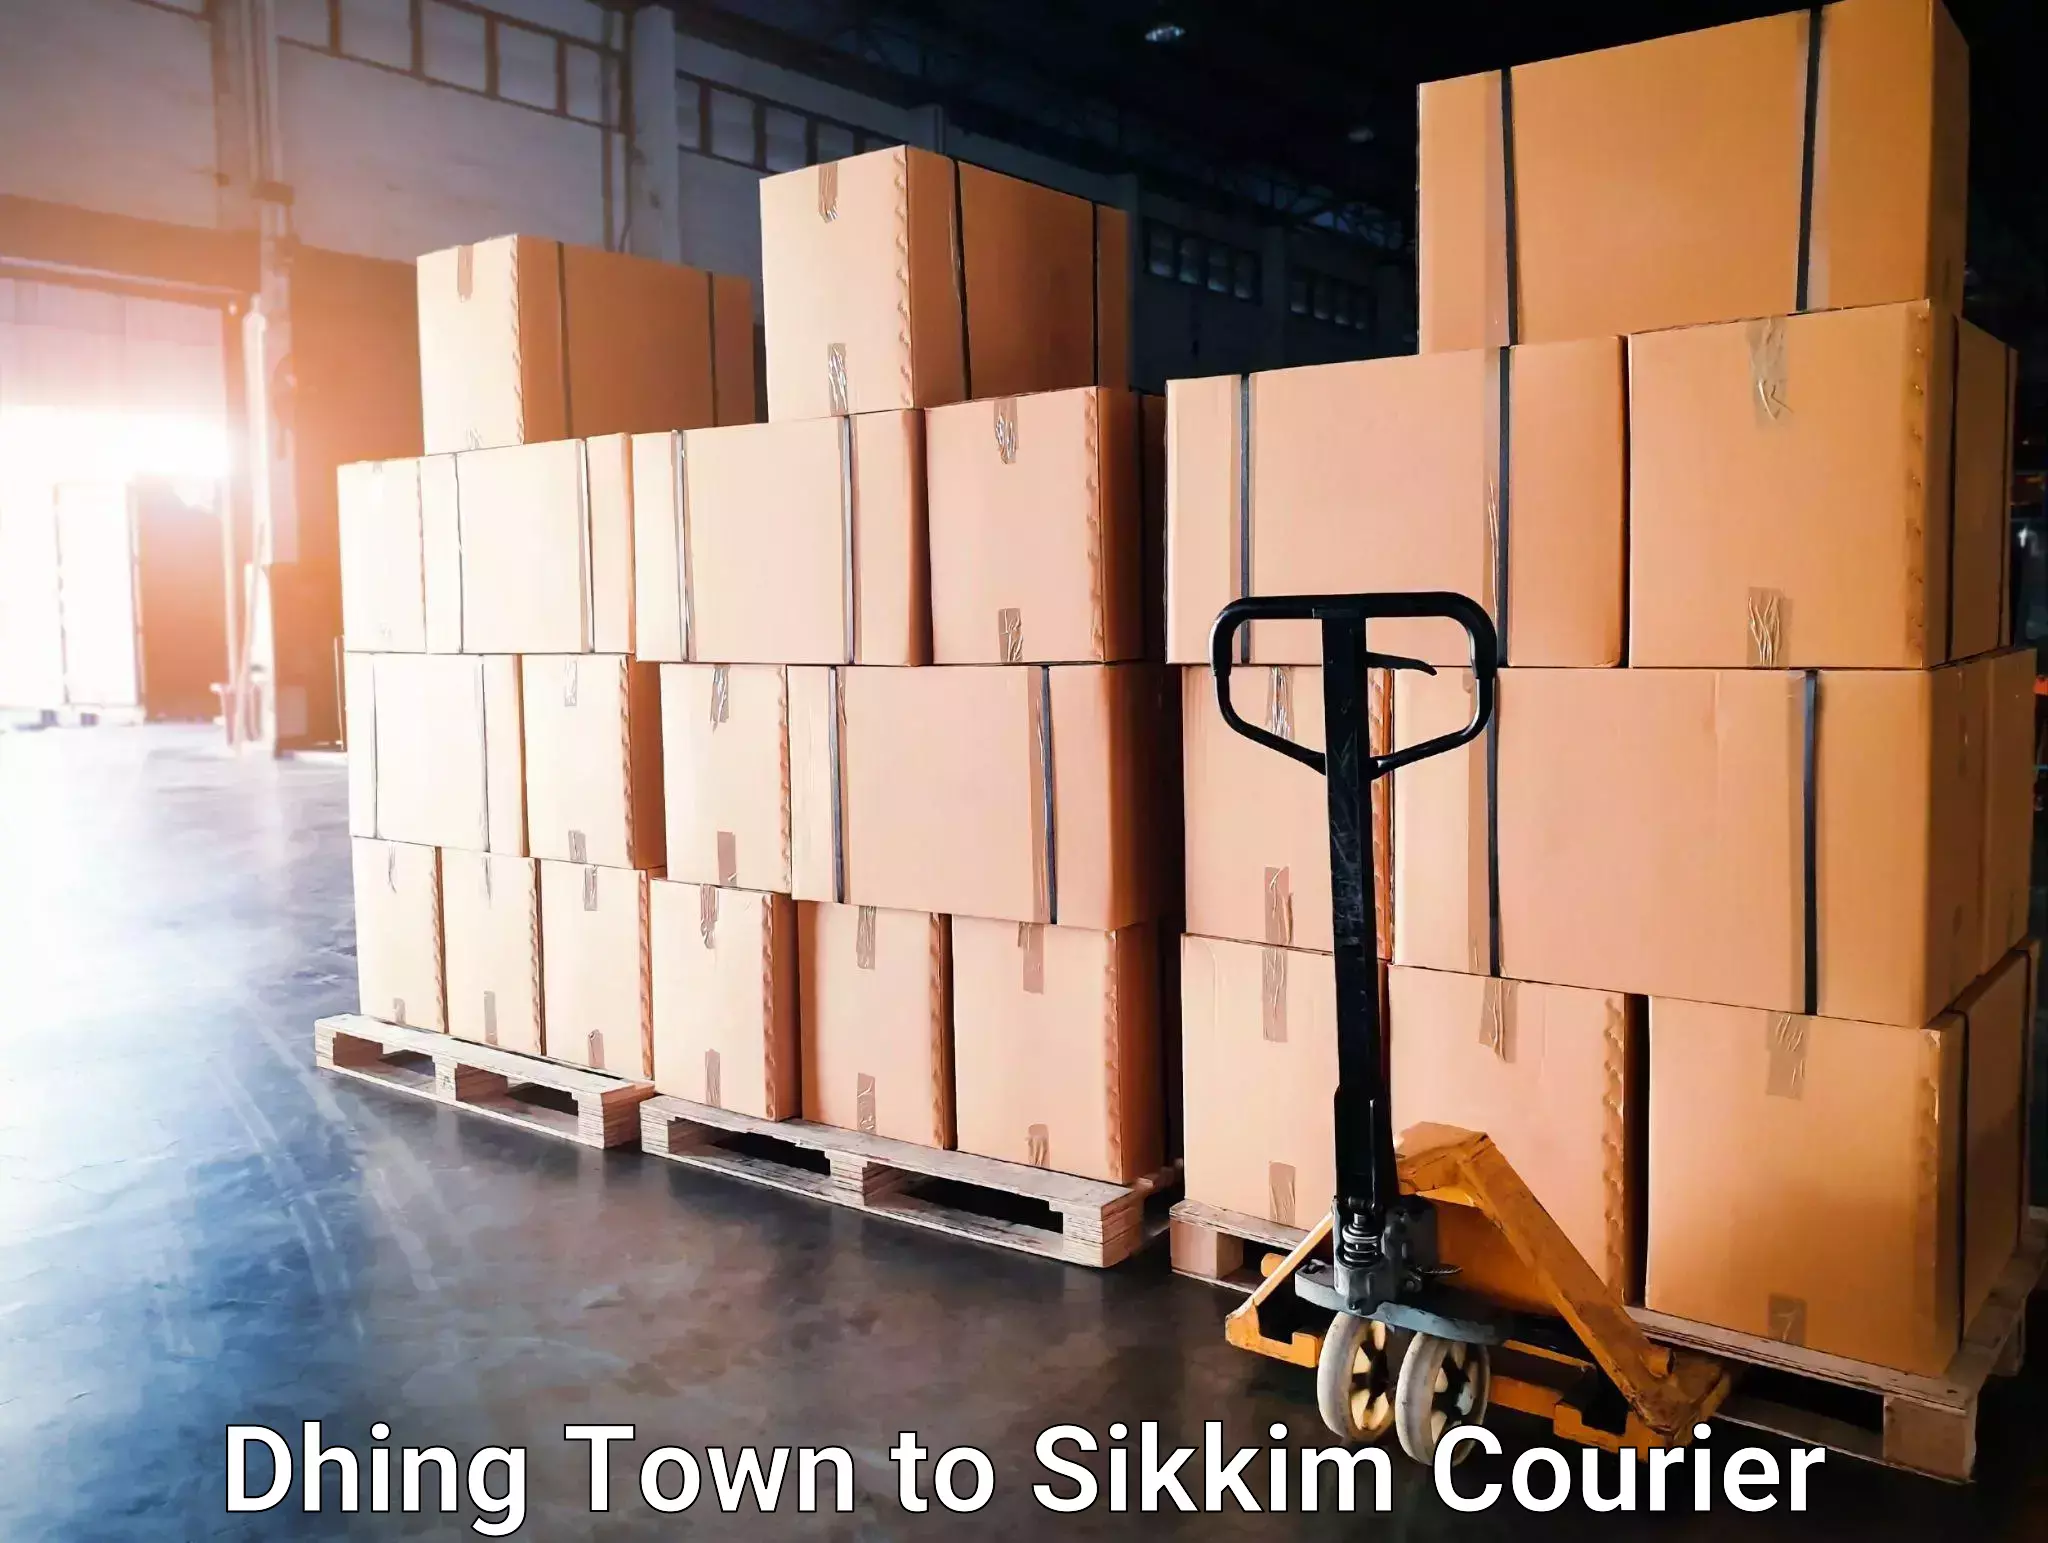 Speedy delivery service Dhing Town to South Sikkim